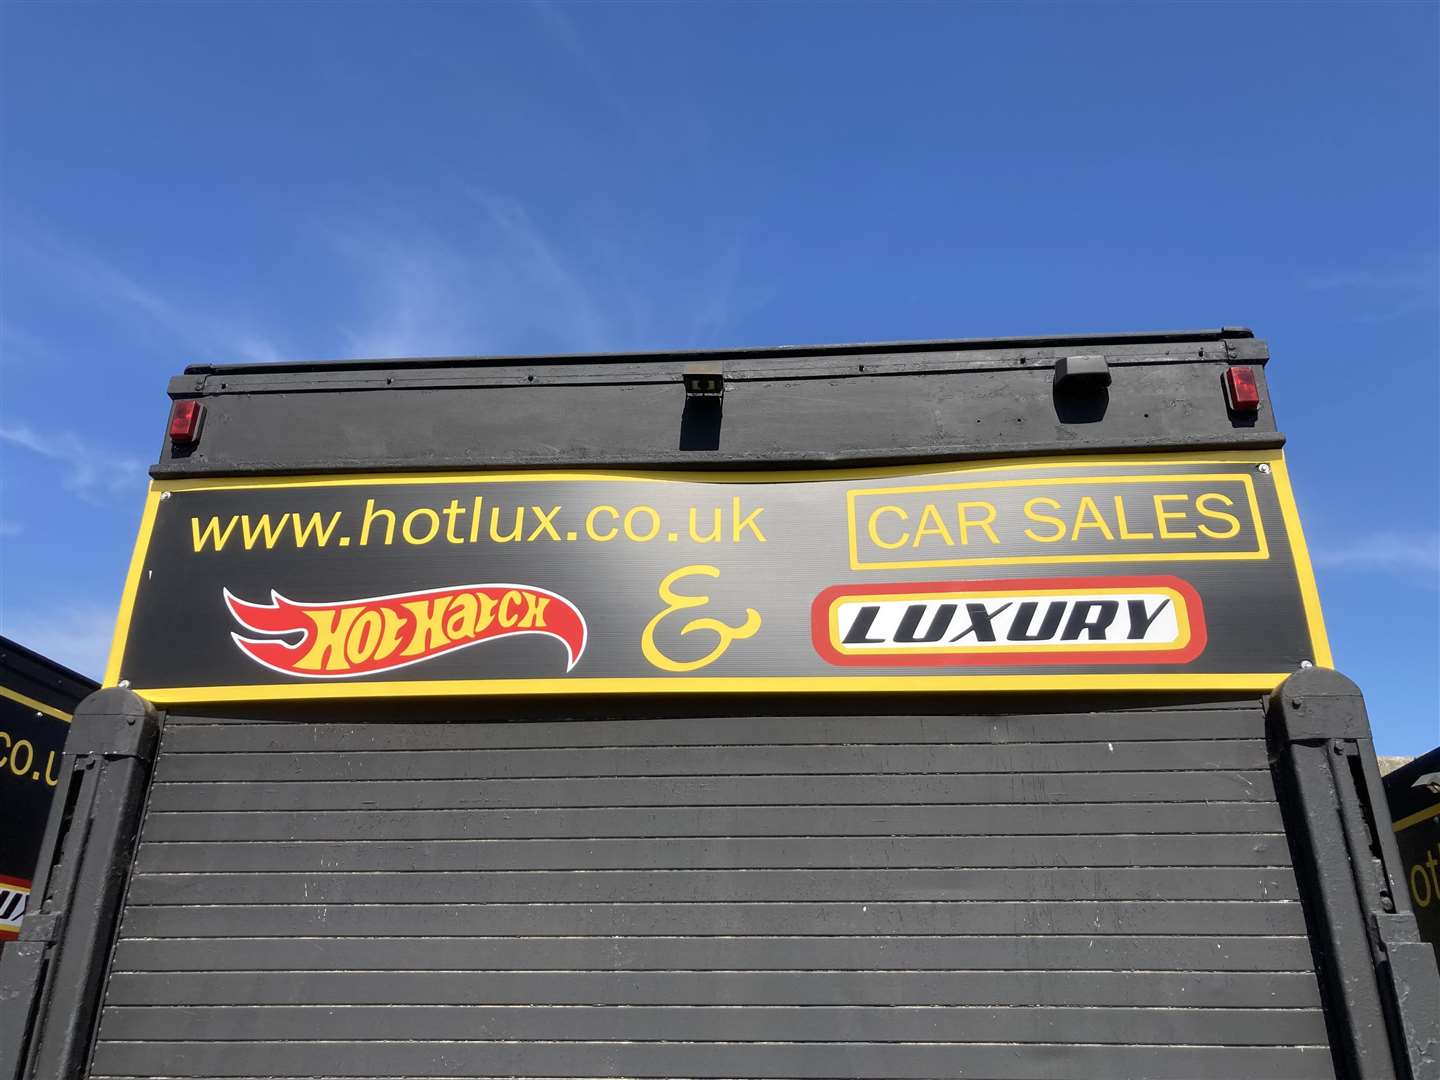 Black vans in the Ship on Shore car park, Sheerness, now have signs for the website www.hotlux.co.uk on them